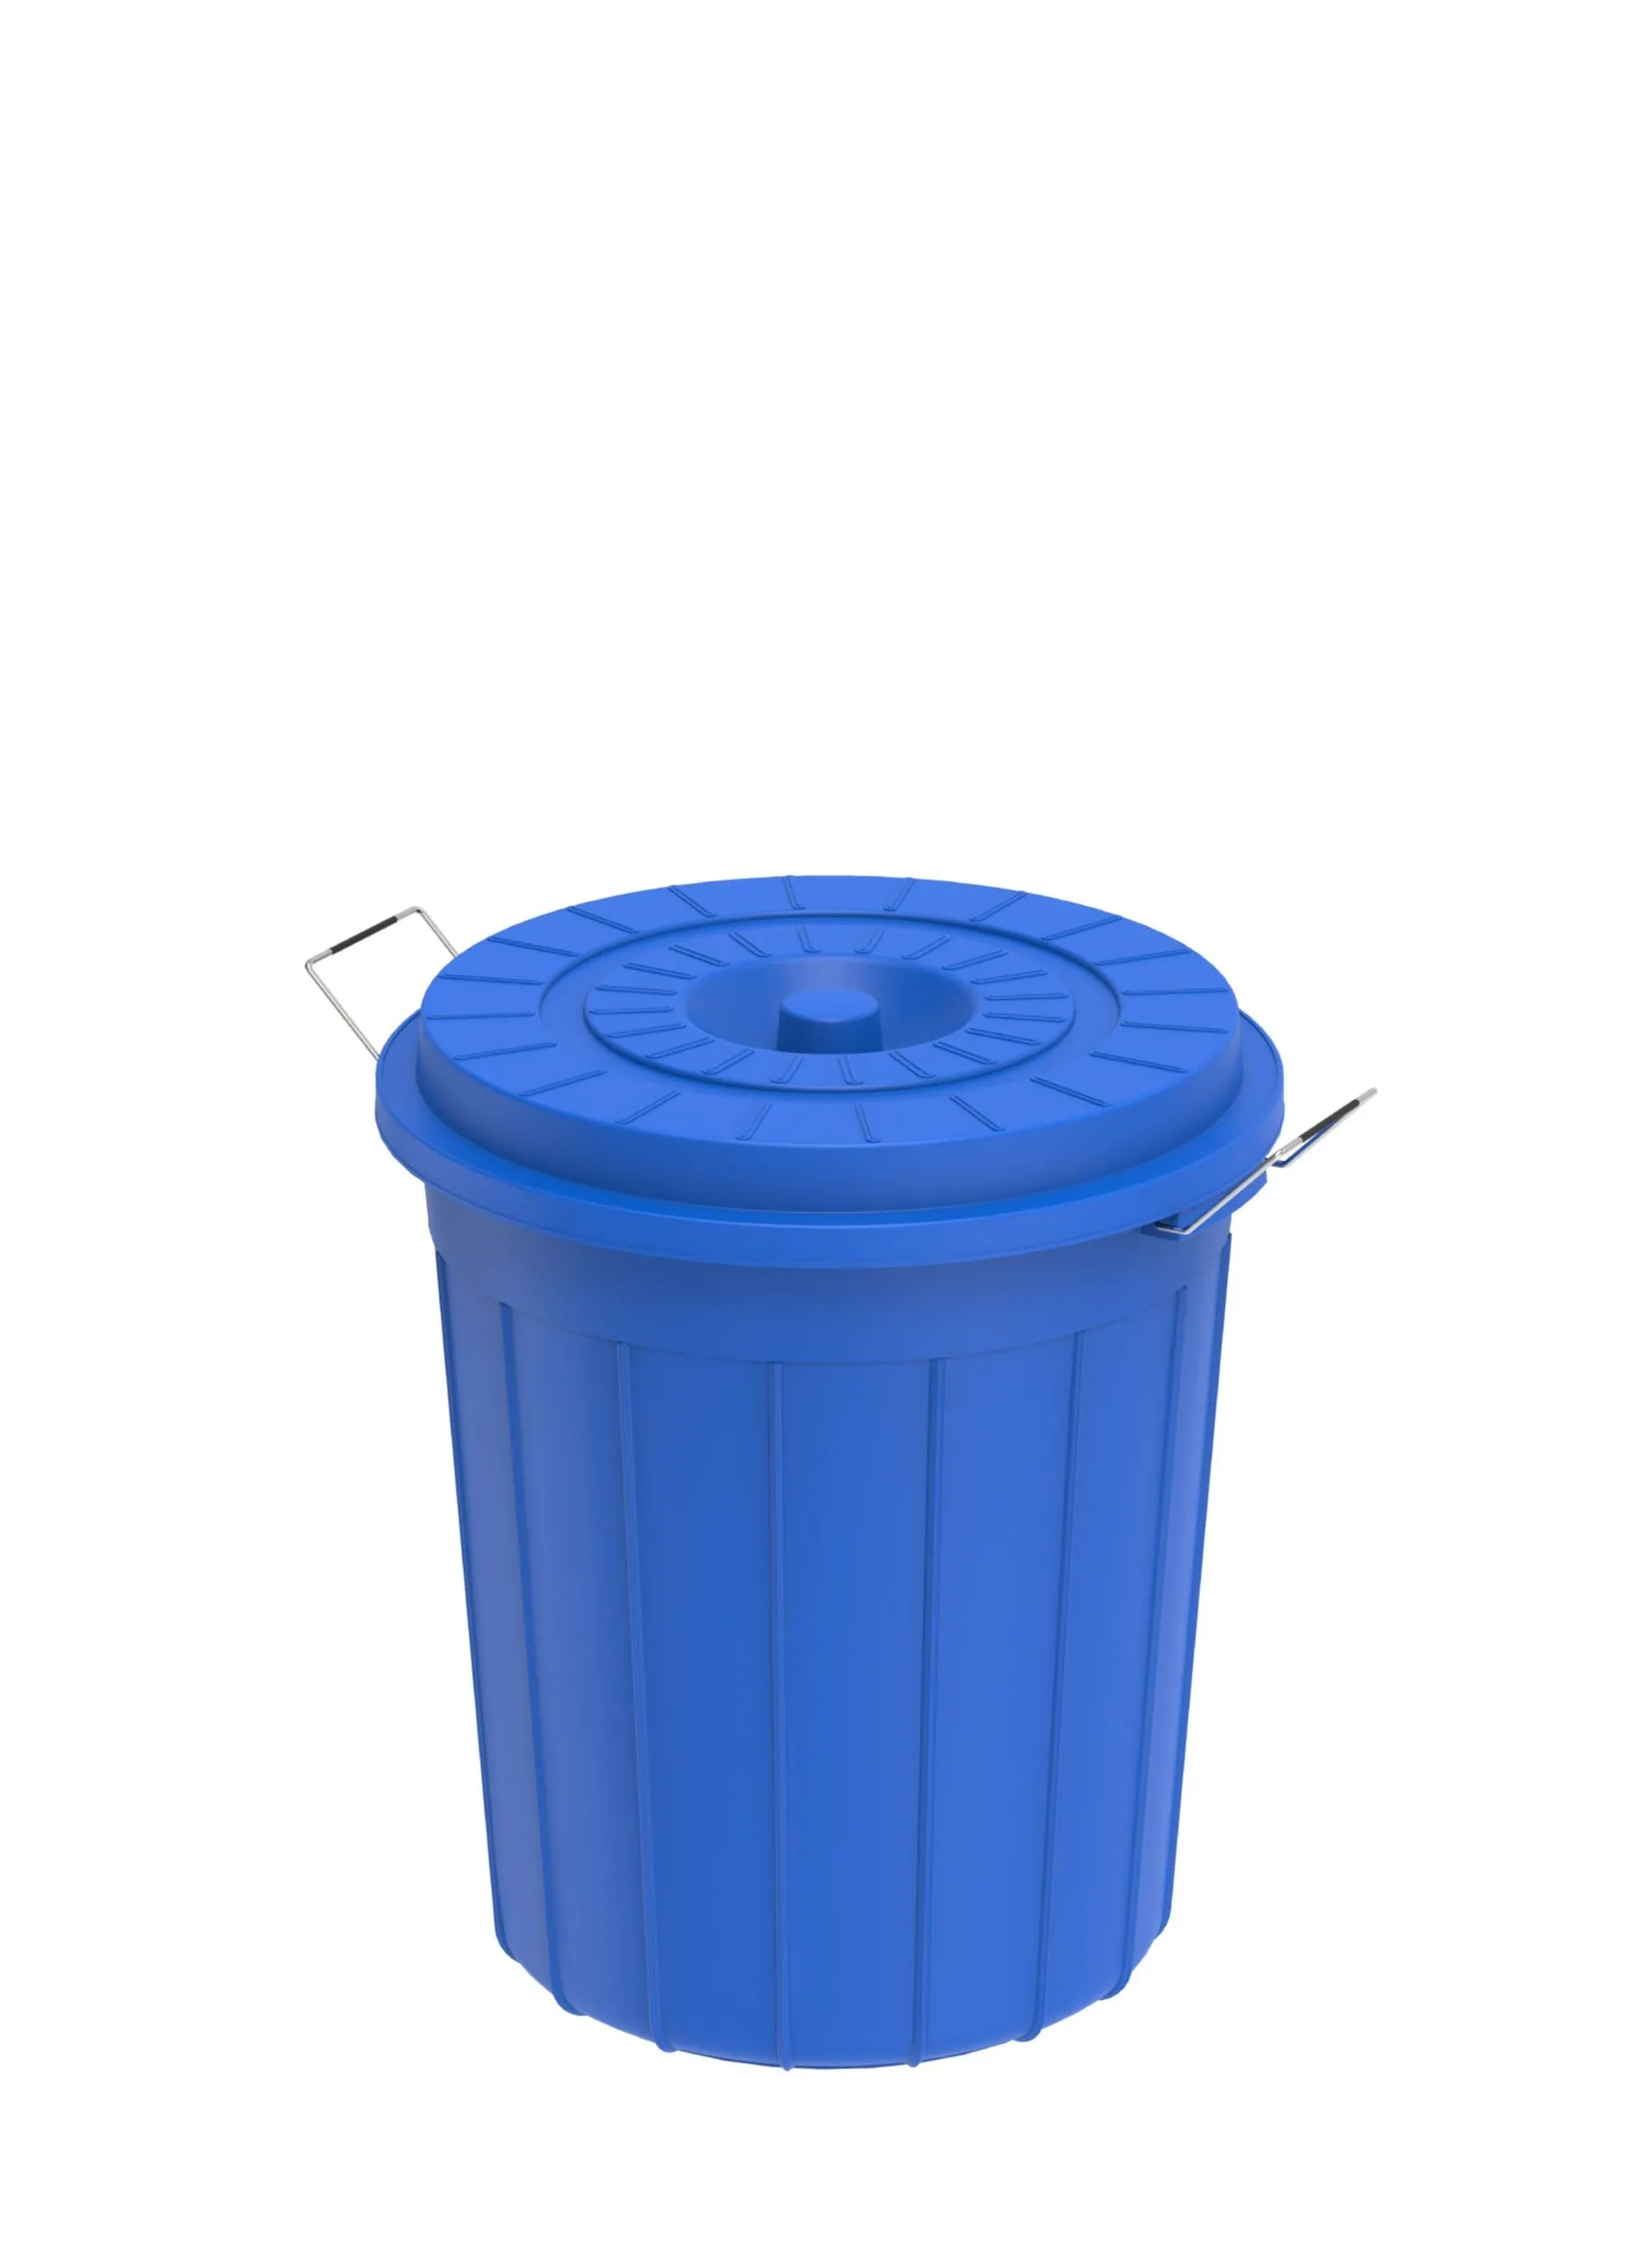 Cosmoplast 35L Round Plastic Drums with Lid